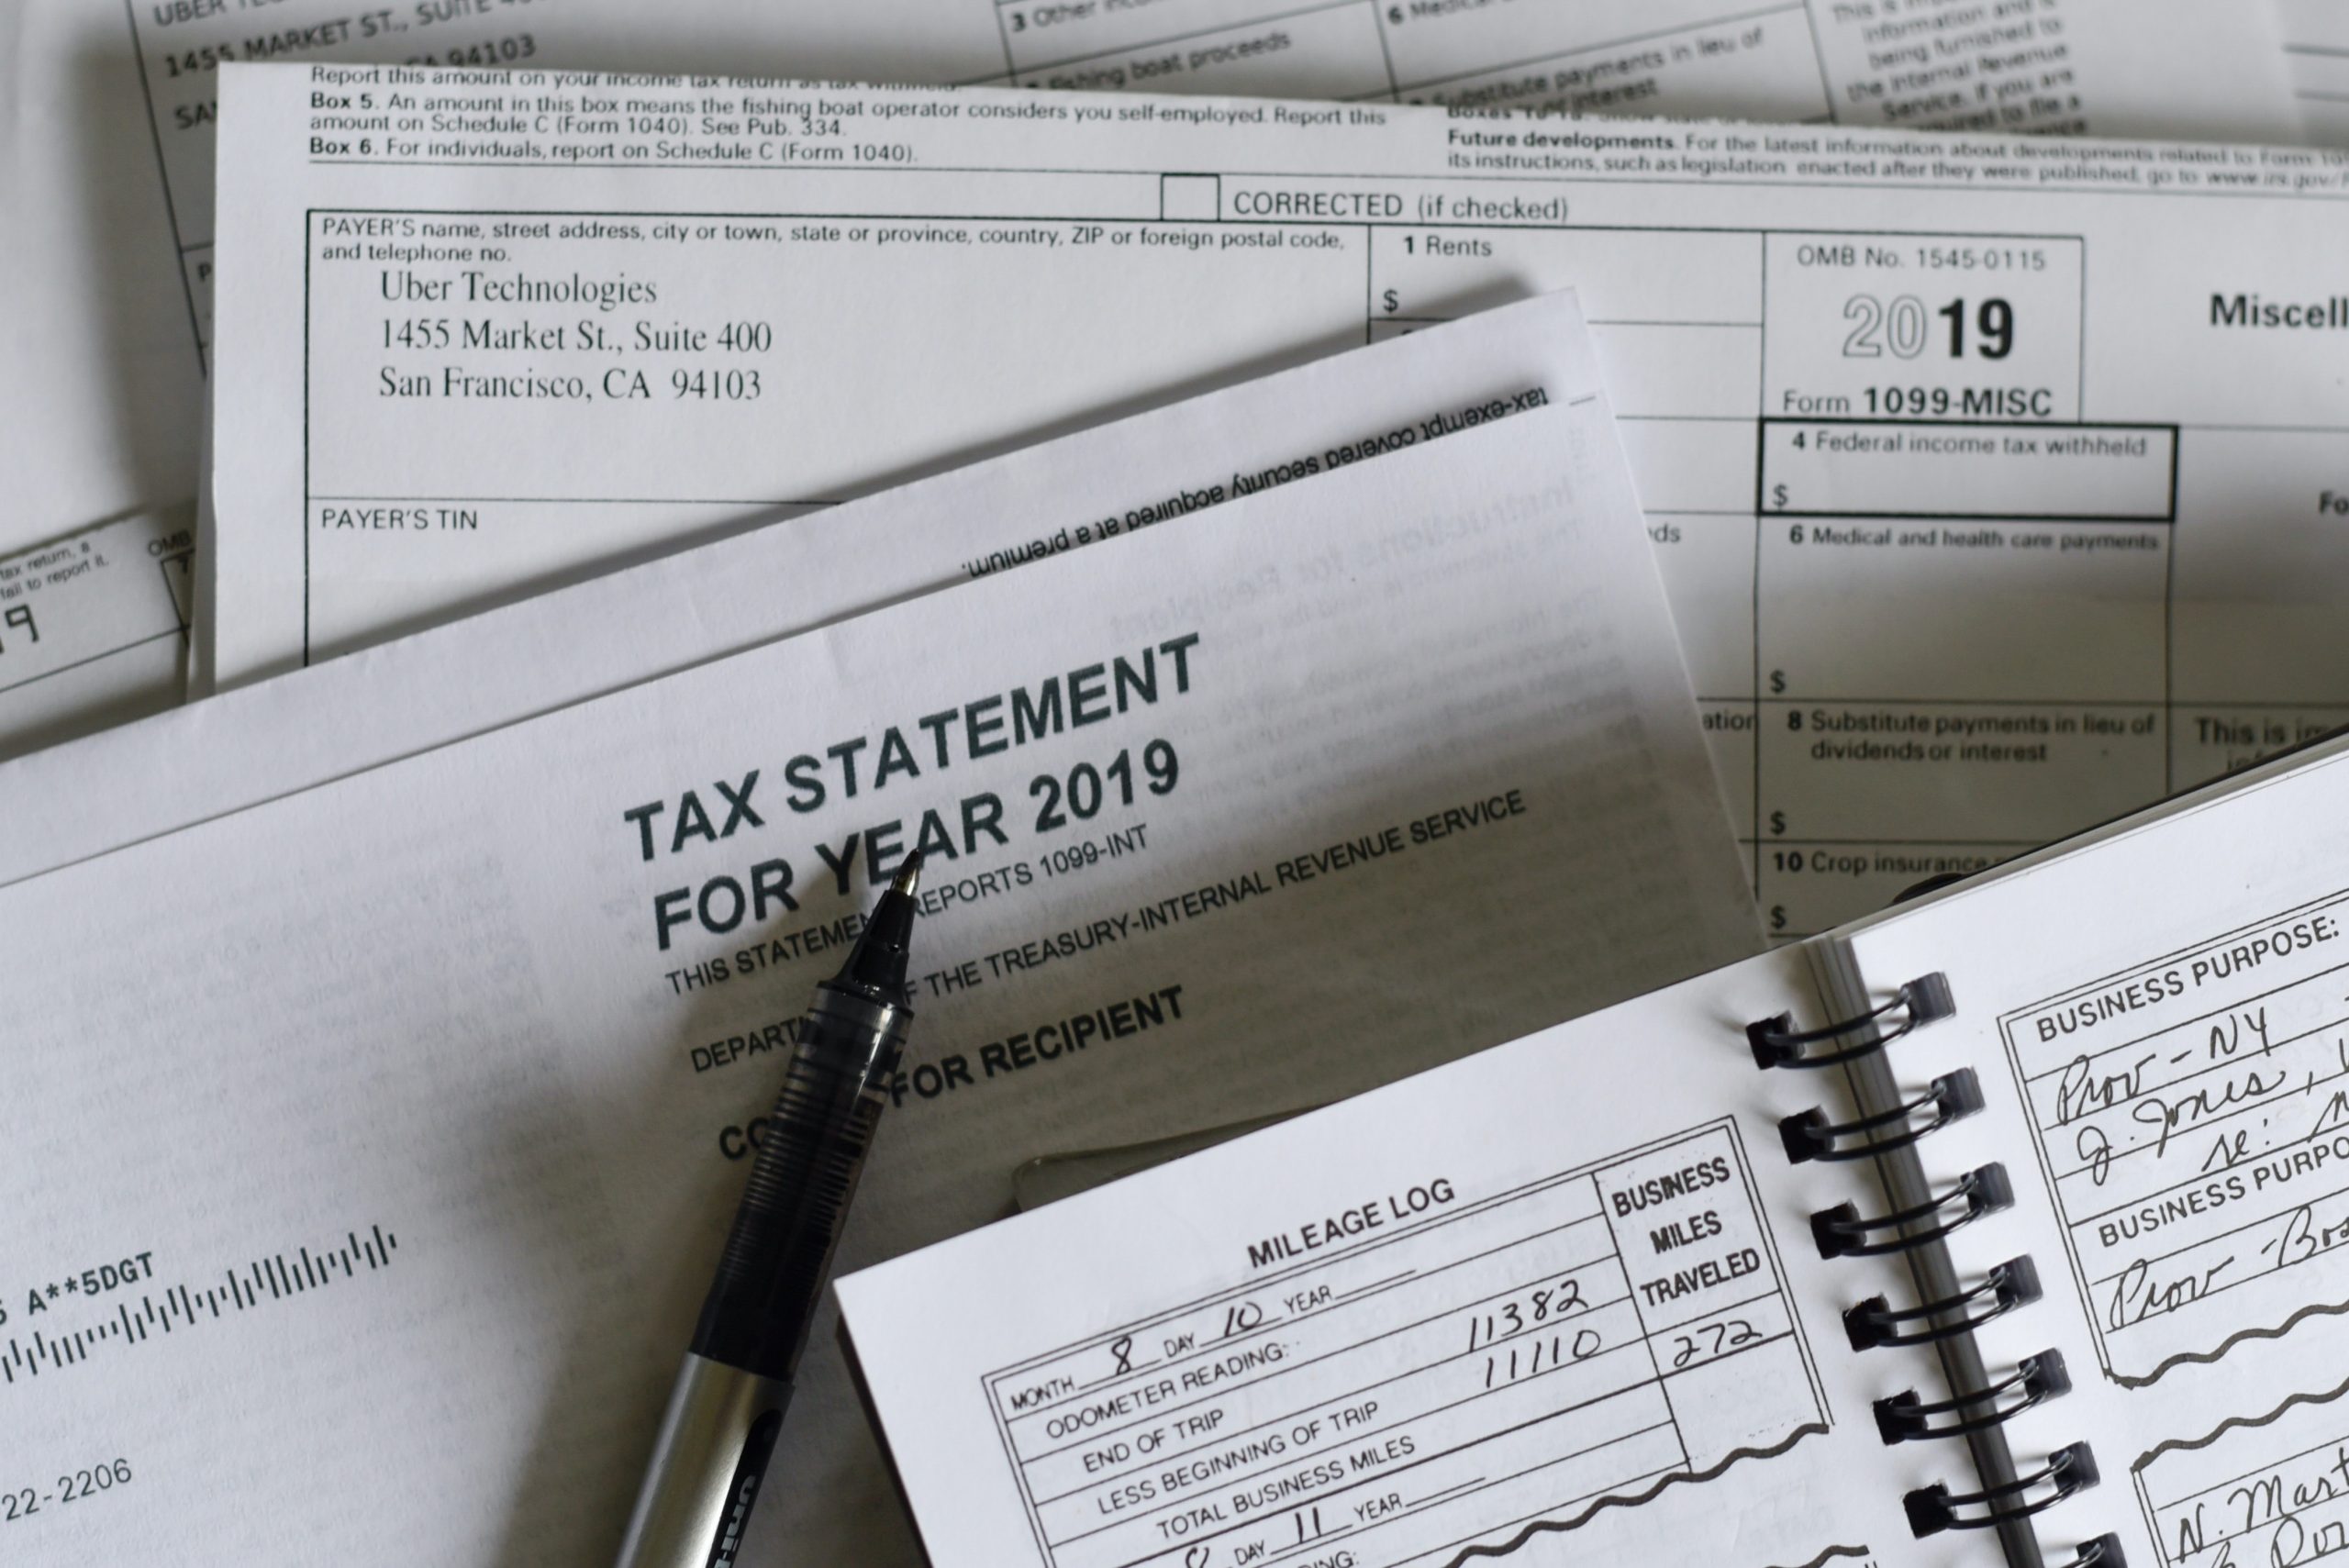 2019 tax statement withMaryland sales and use tax information